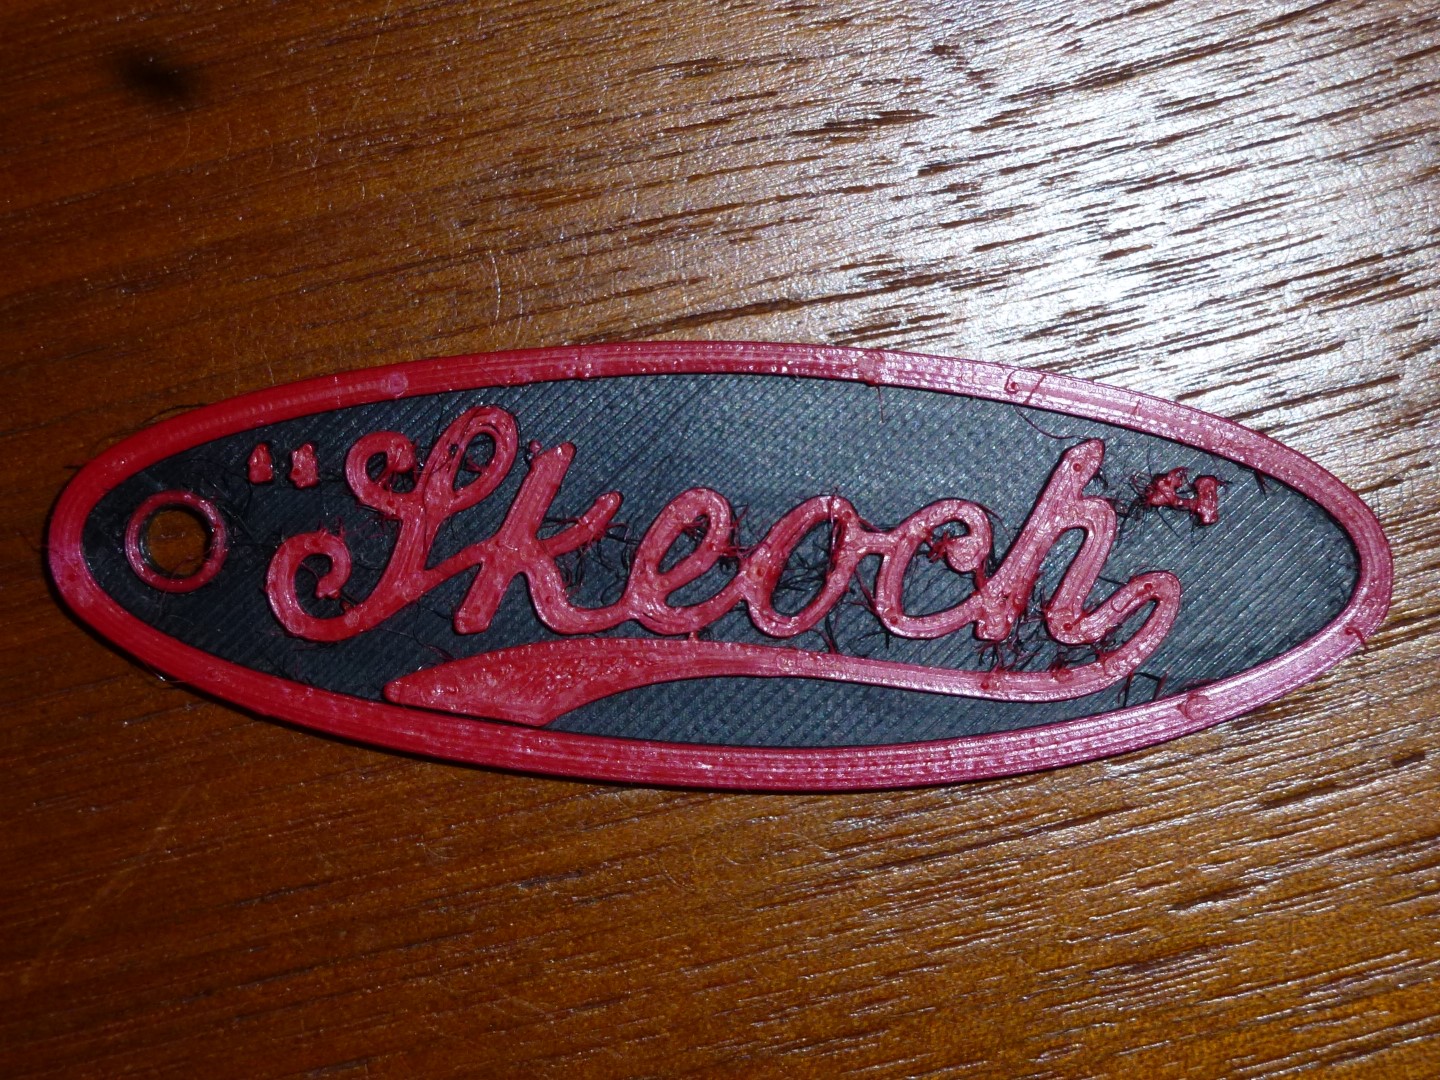 Our first 3D printed, red on black, Skeoch key fob